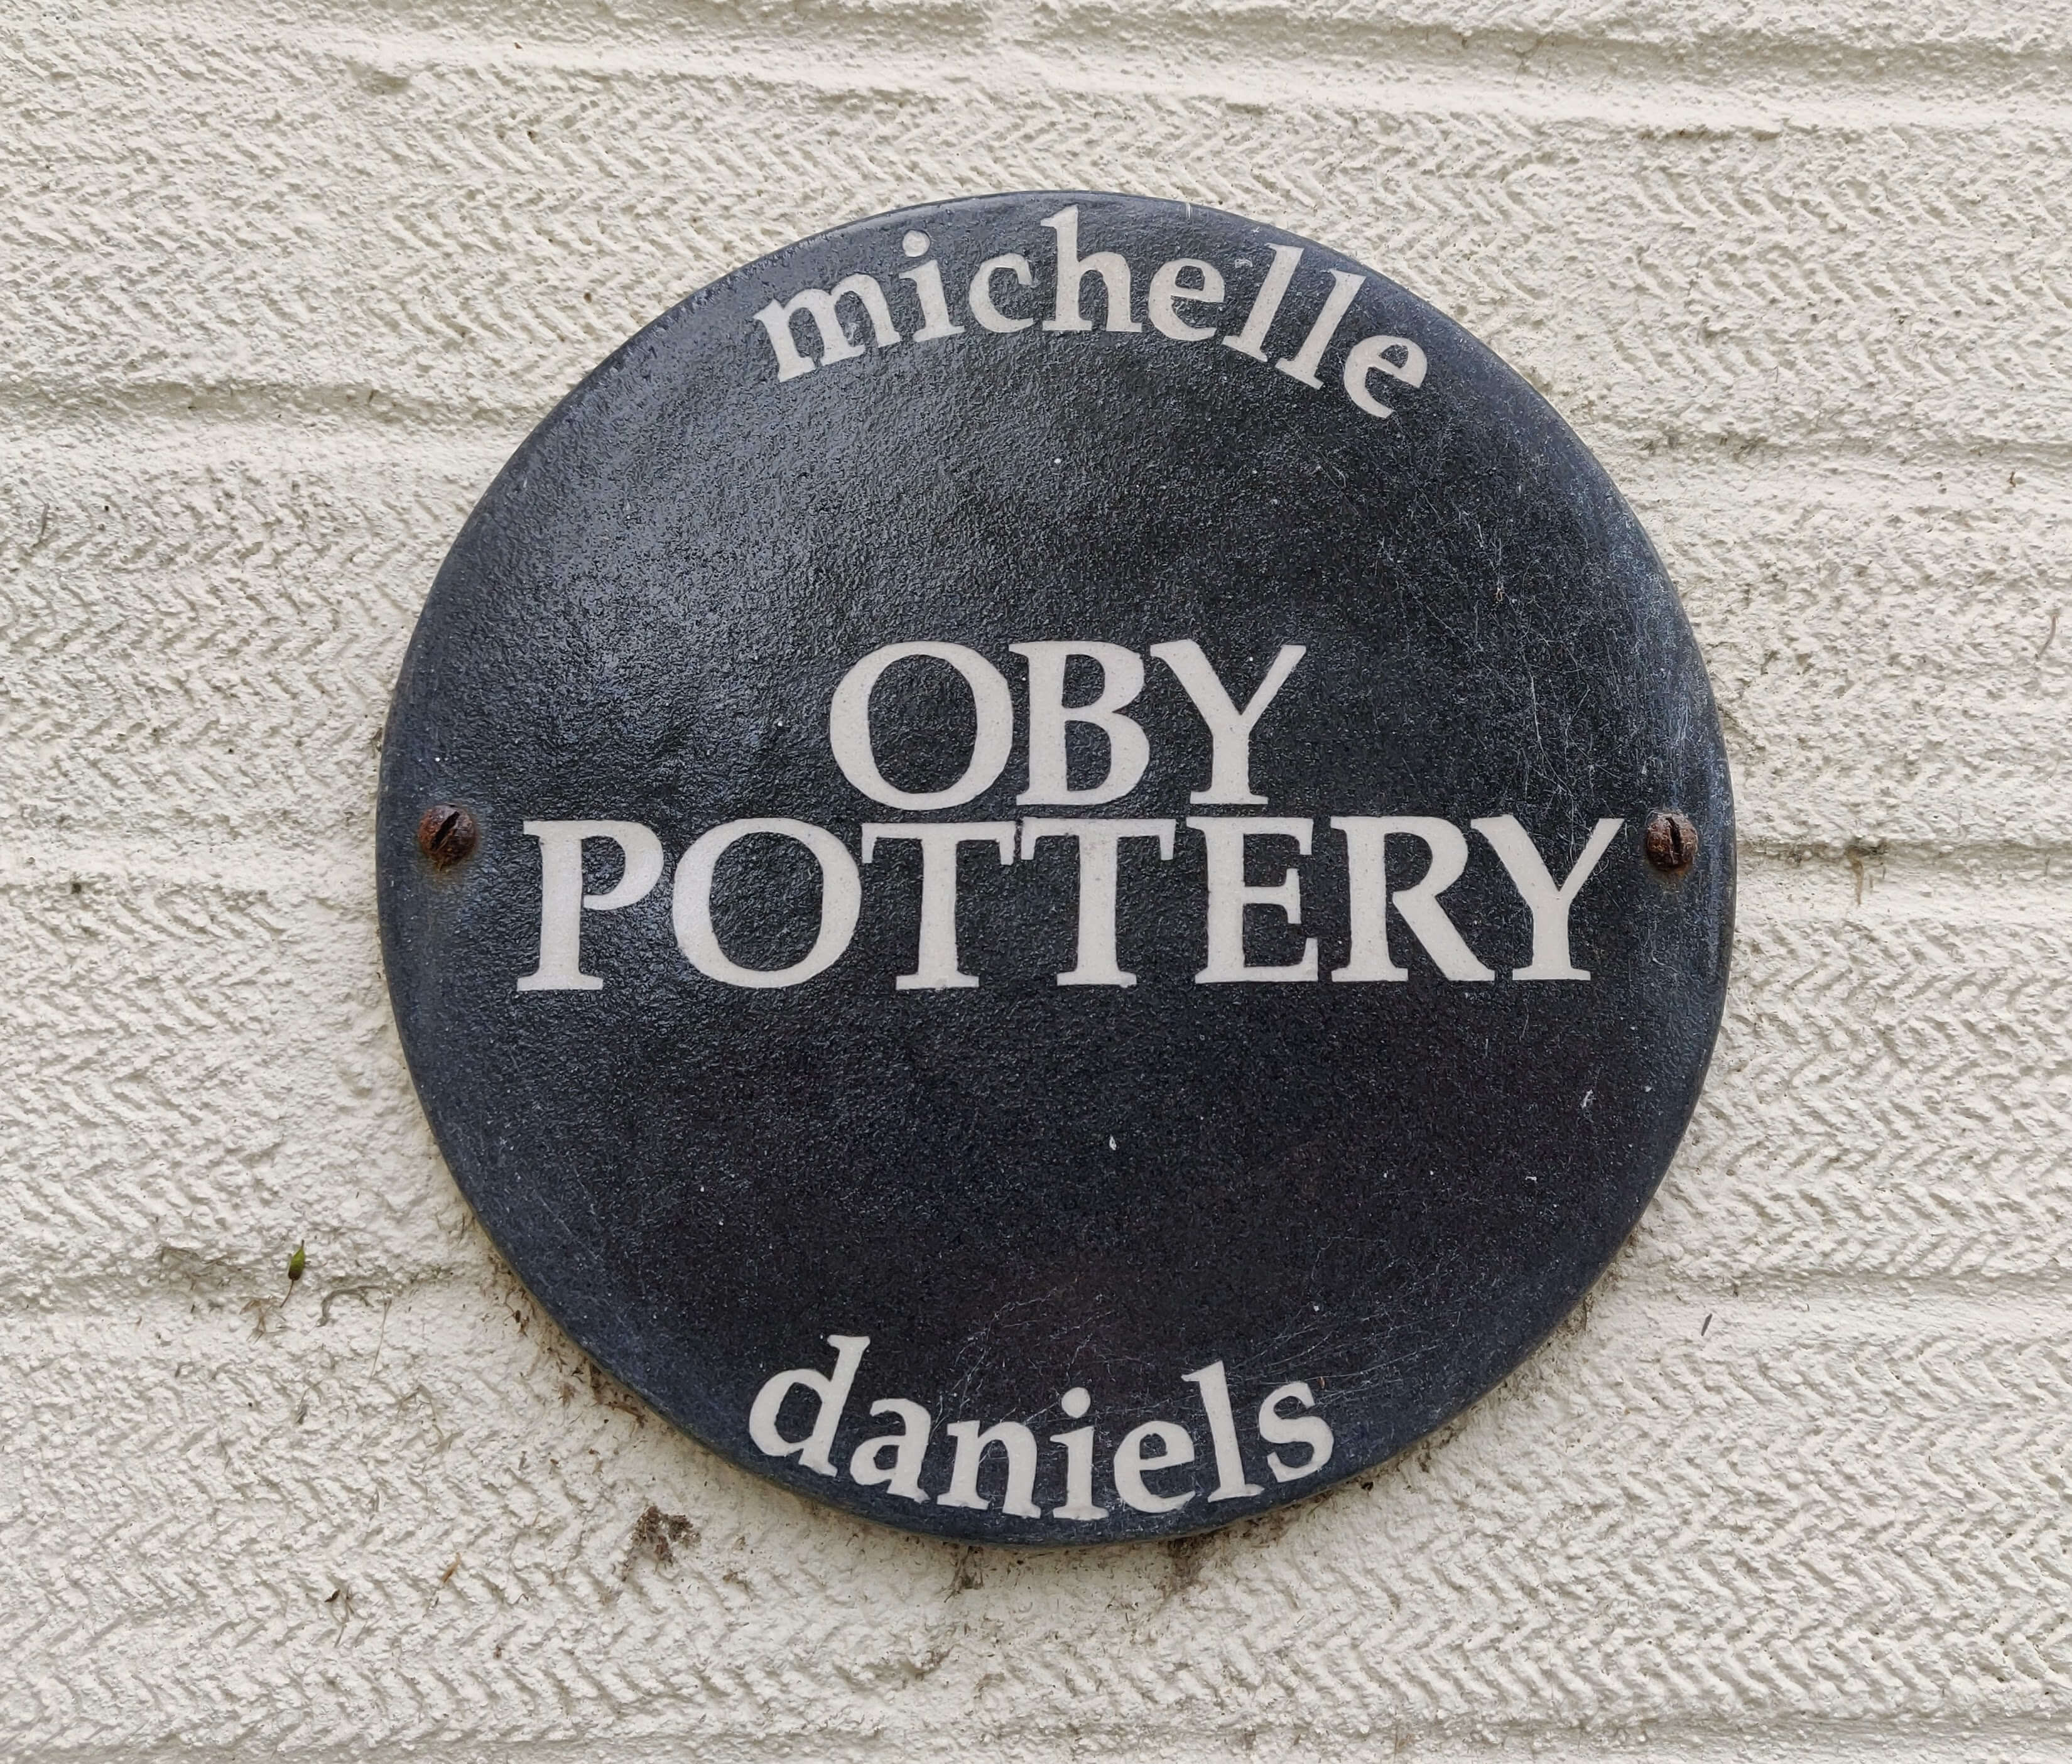 Welcome to Oby Pottery